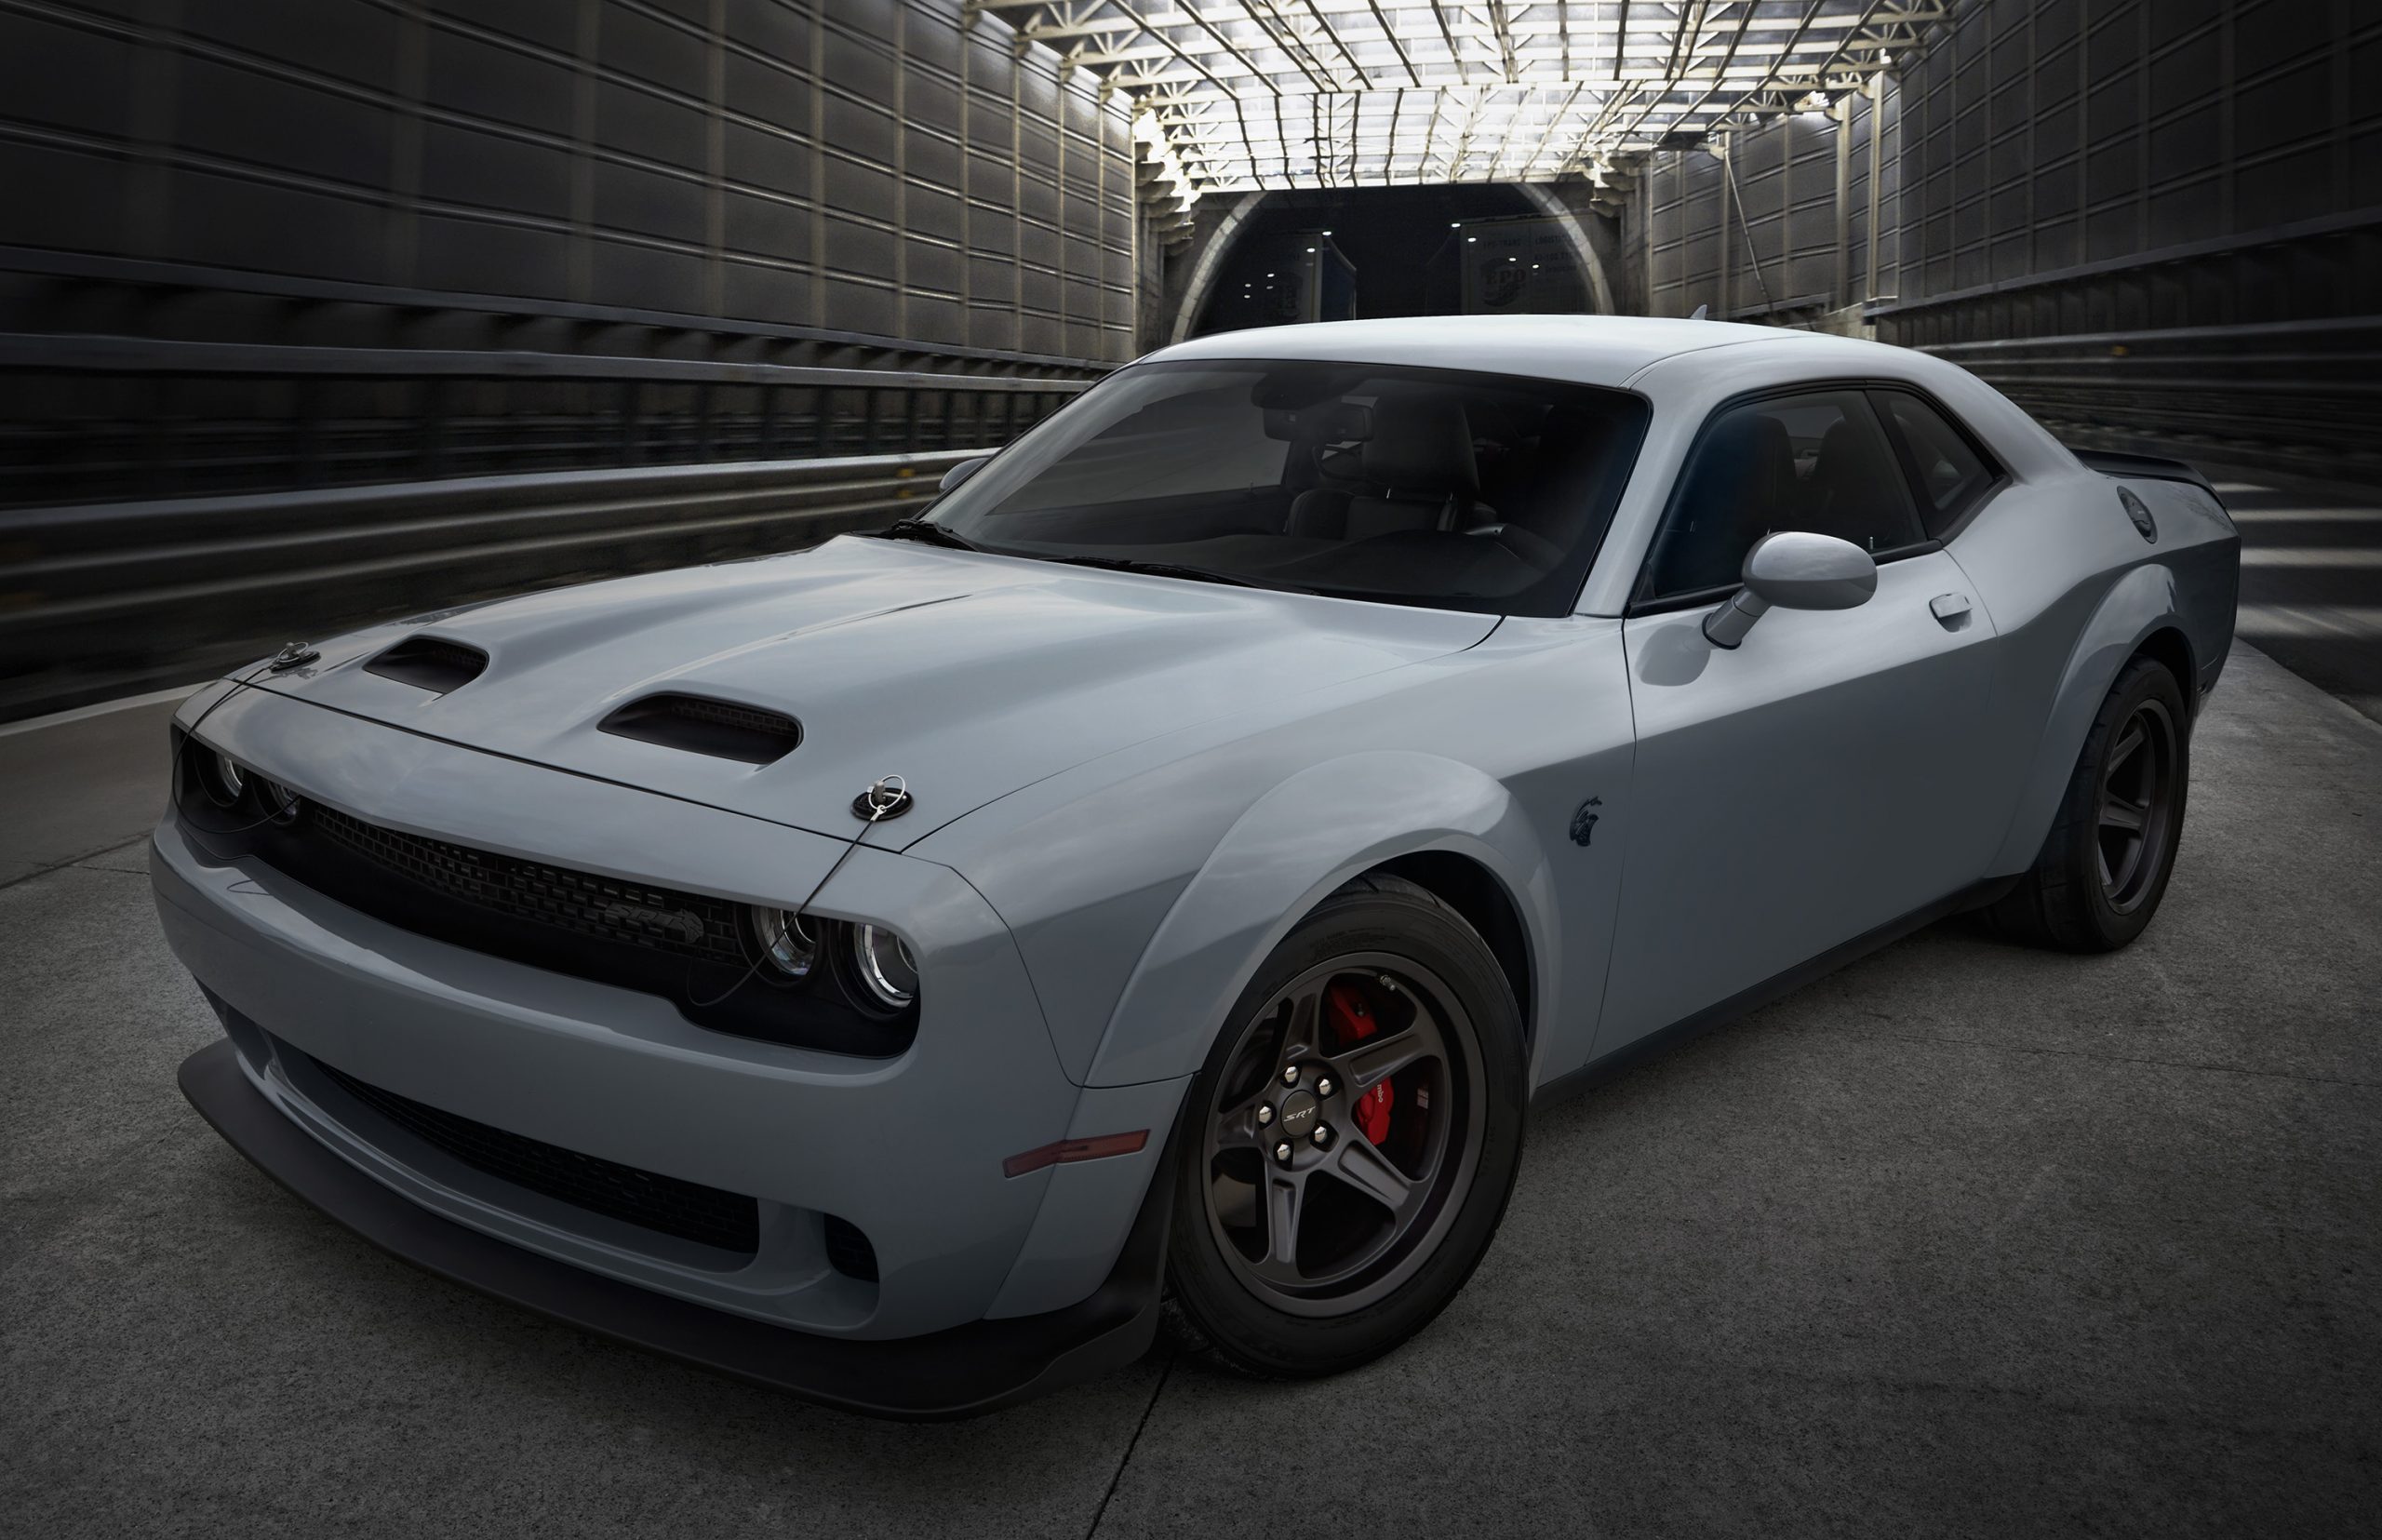 A steel grey Dodge Challenger, shot from the 3/4 angle